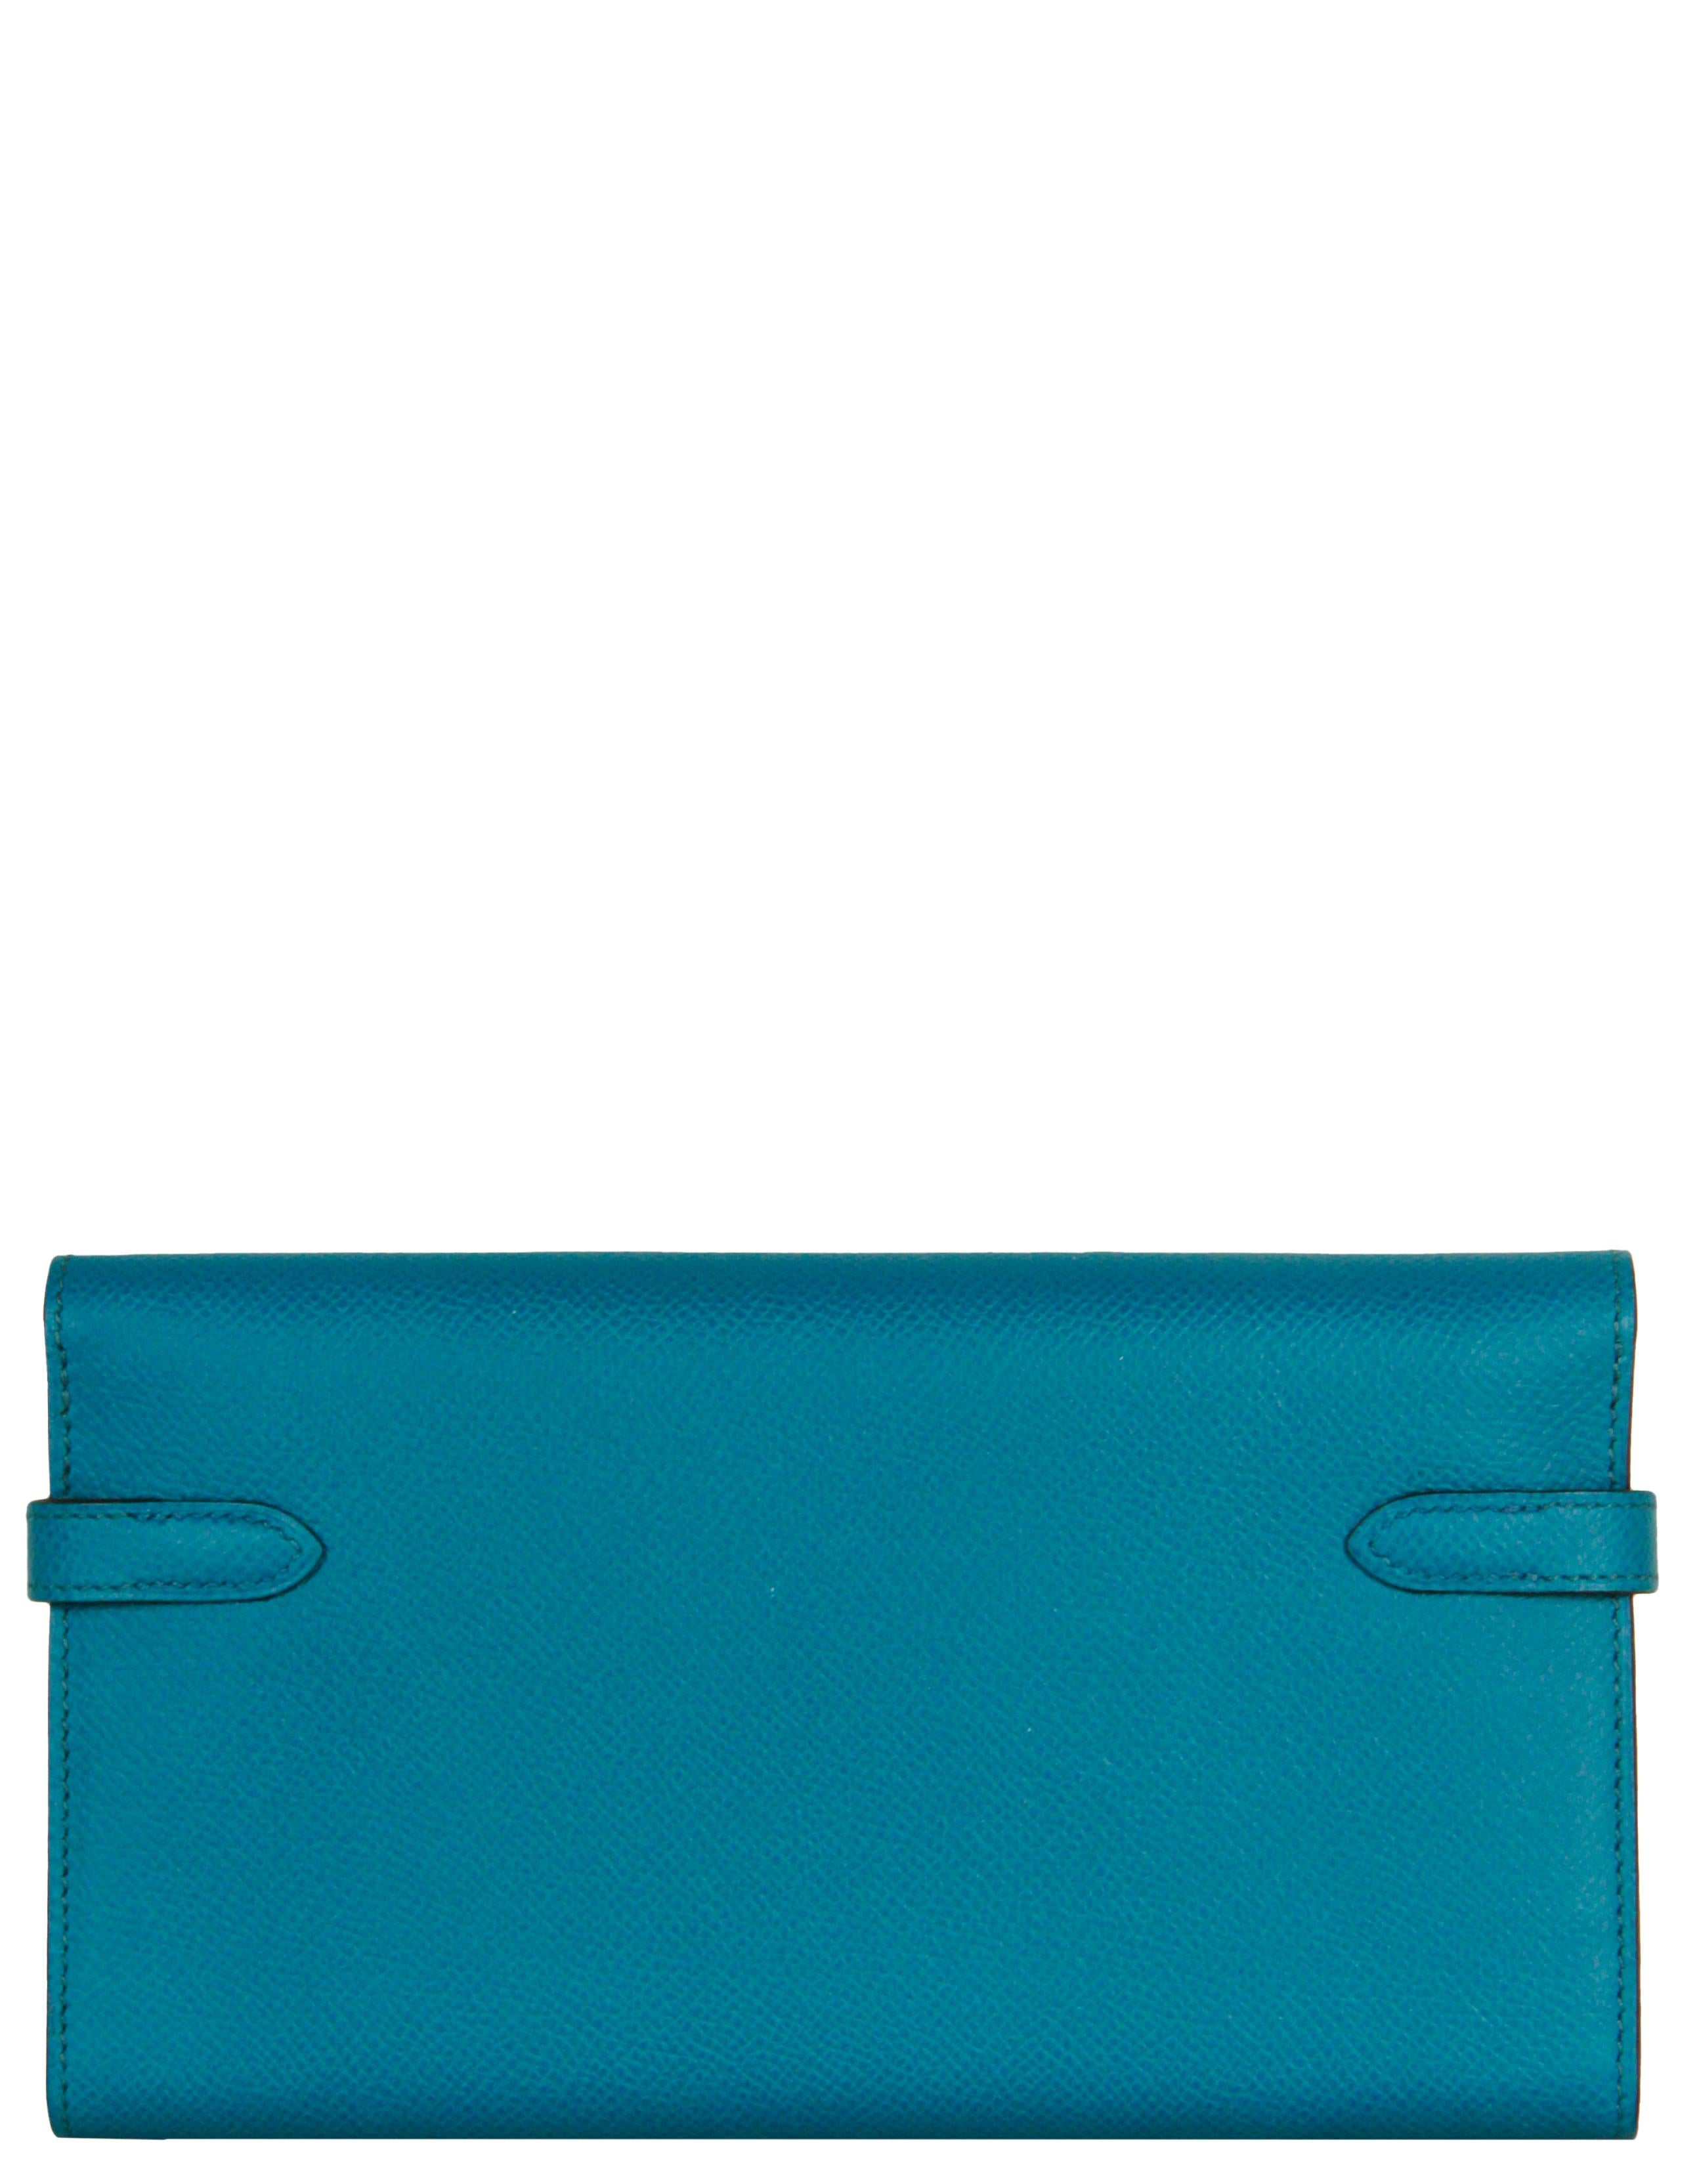 Hermes Blue Leather Kelly Longue Wallet w/ Palladium

Made In: France
Year of Production: 2014
Color: Colvert blue
Hardware: Silvertone palladium
Materials: Epsom leather
Lining: leather
Closure/Opening: Double arm strap with twist lock
Interior